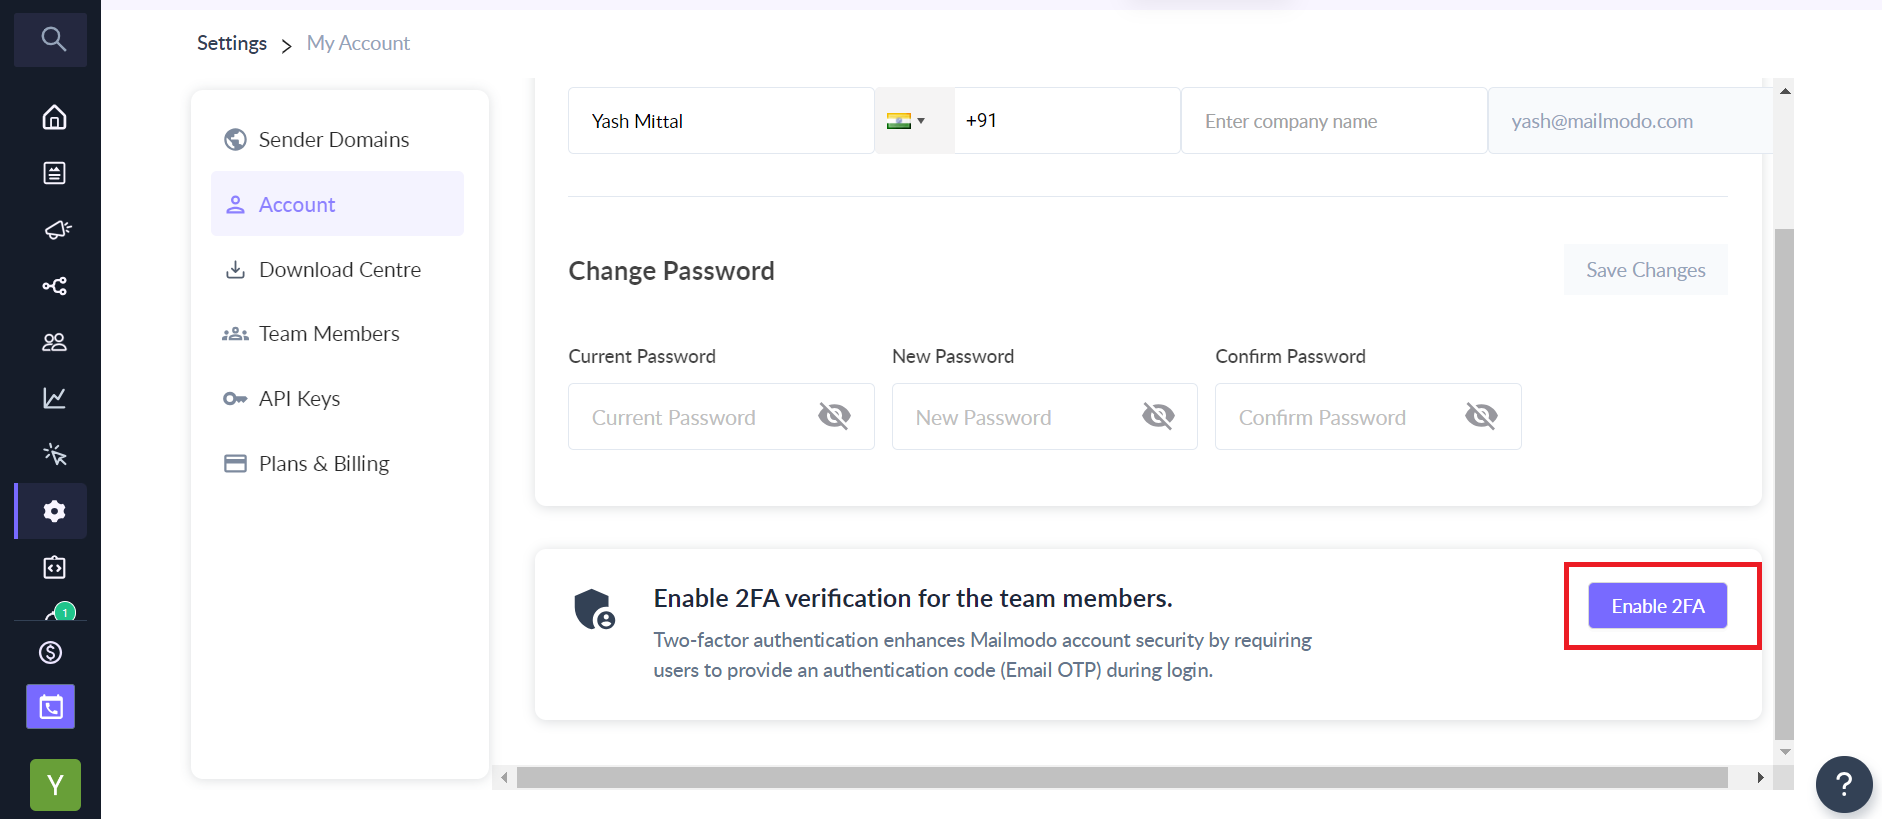 How to set up two-factor authentication (2FA) for your Mailmodo account?